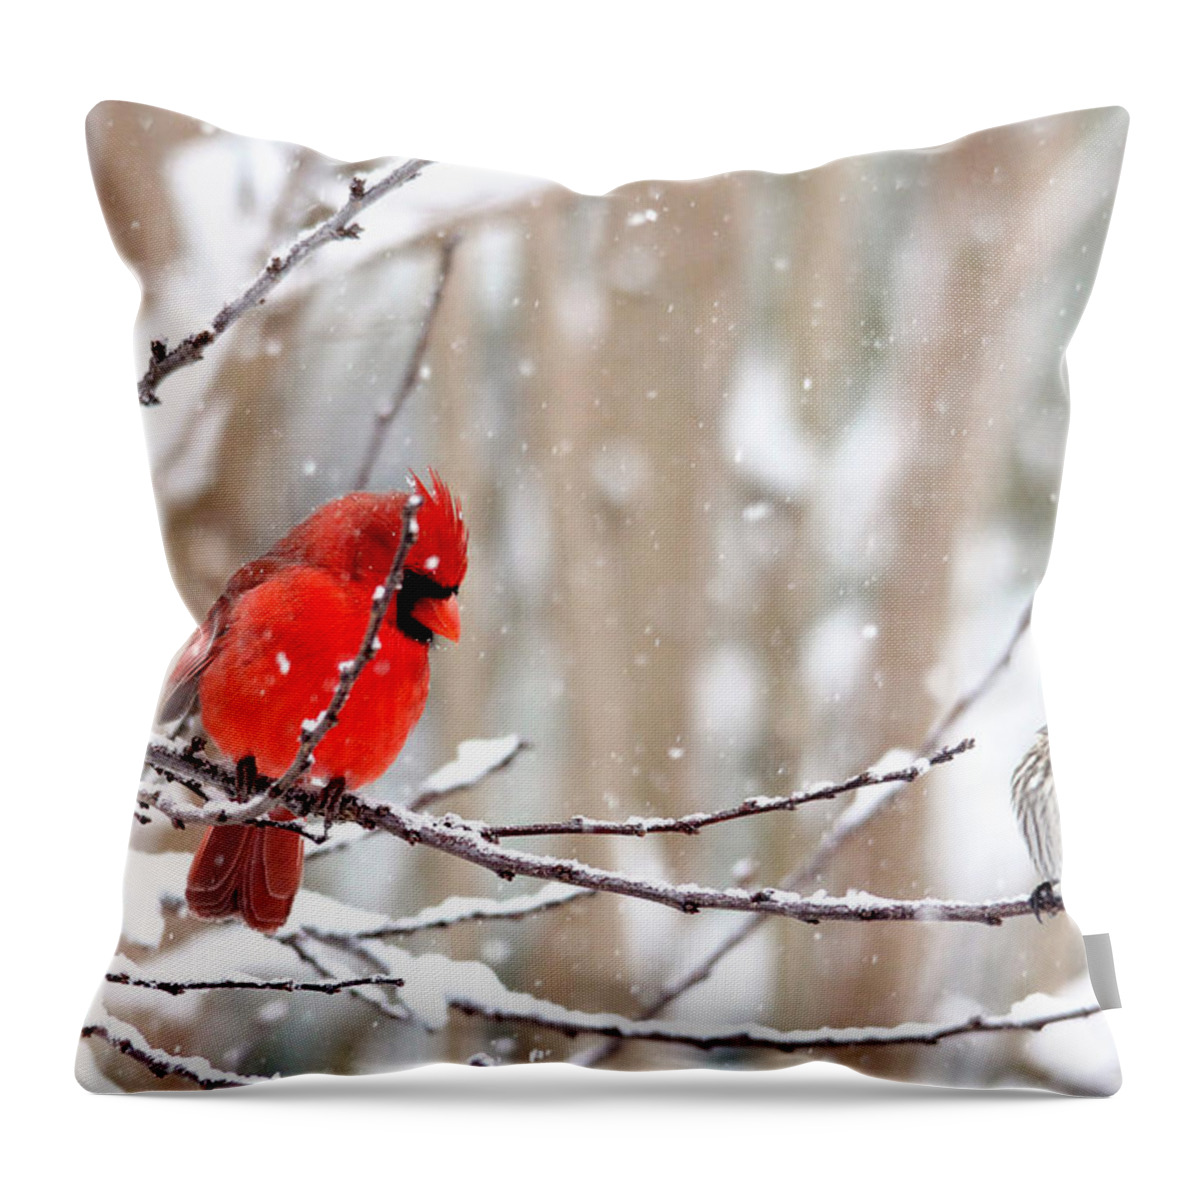 Birds Throw Pillow featuring the photograph Feathered Friends by Trina Ansel